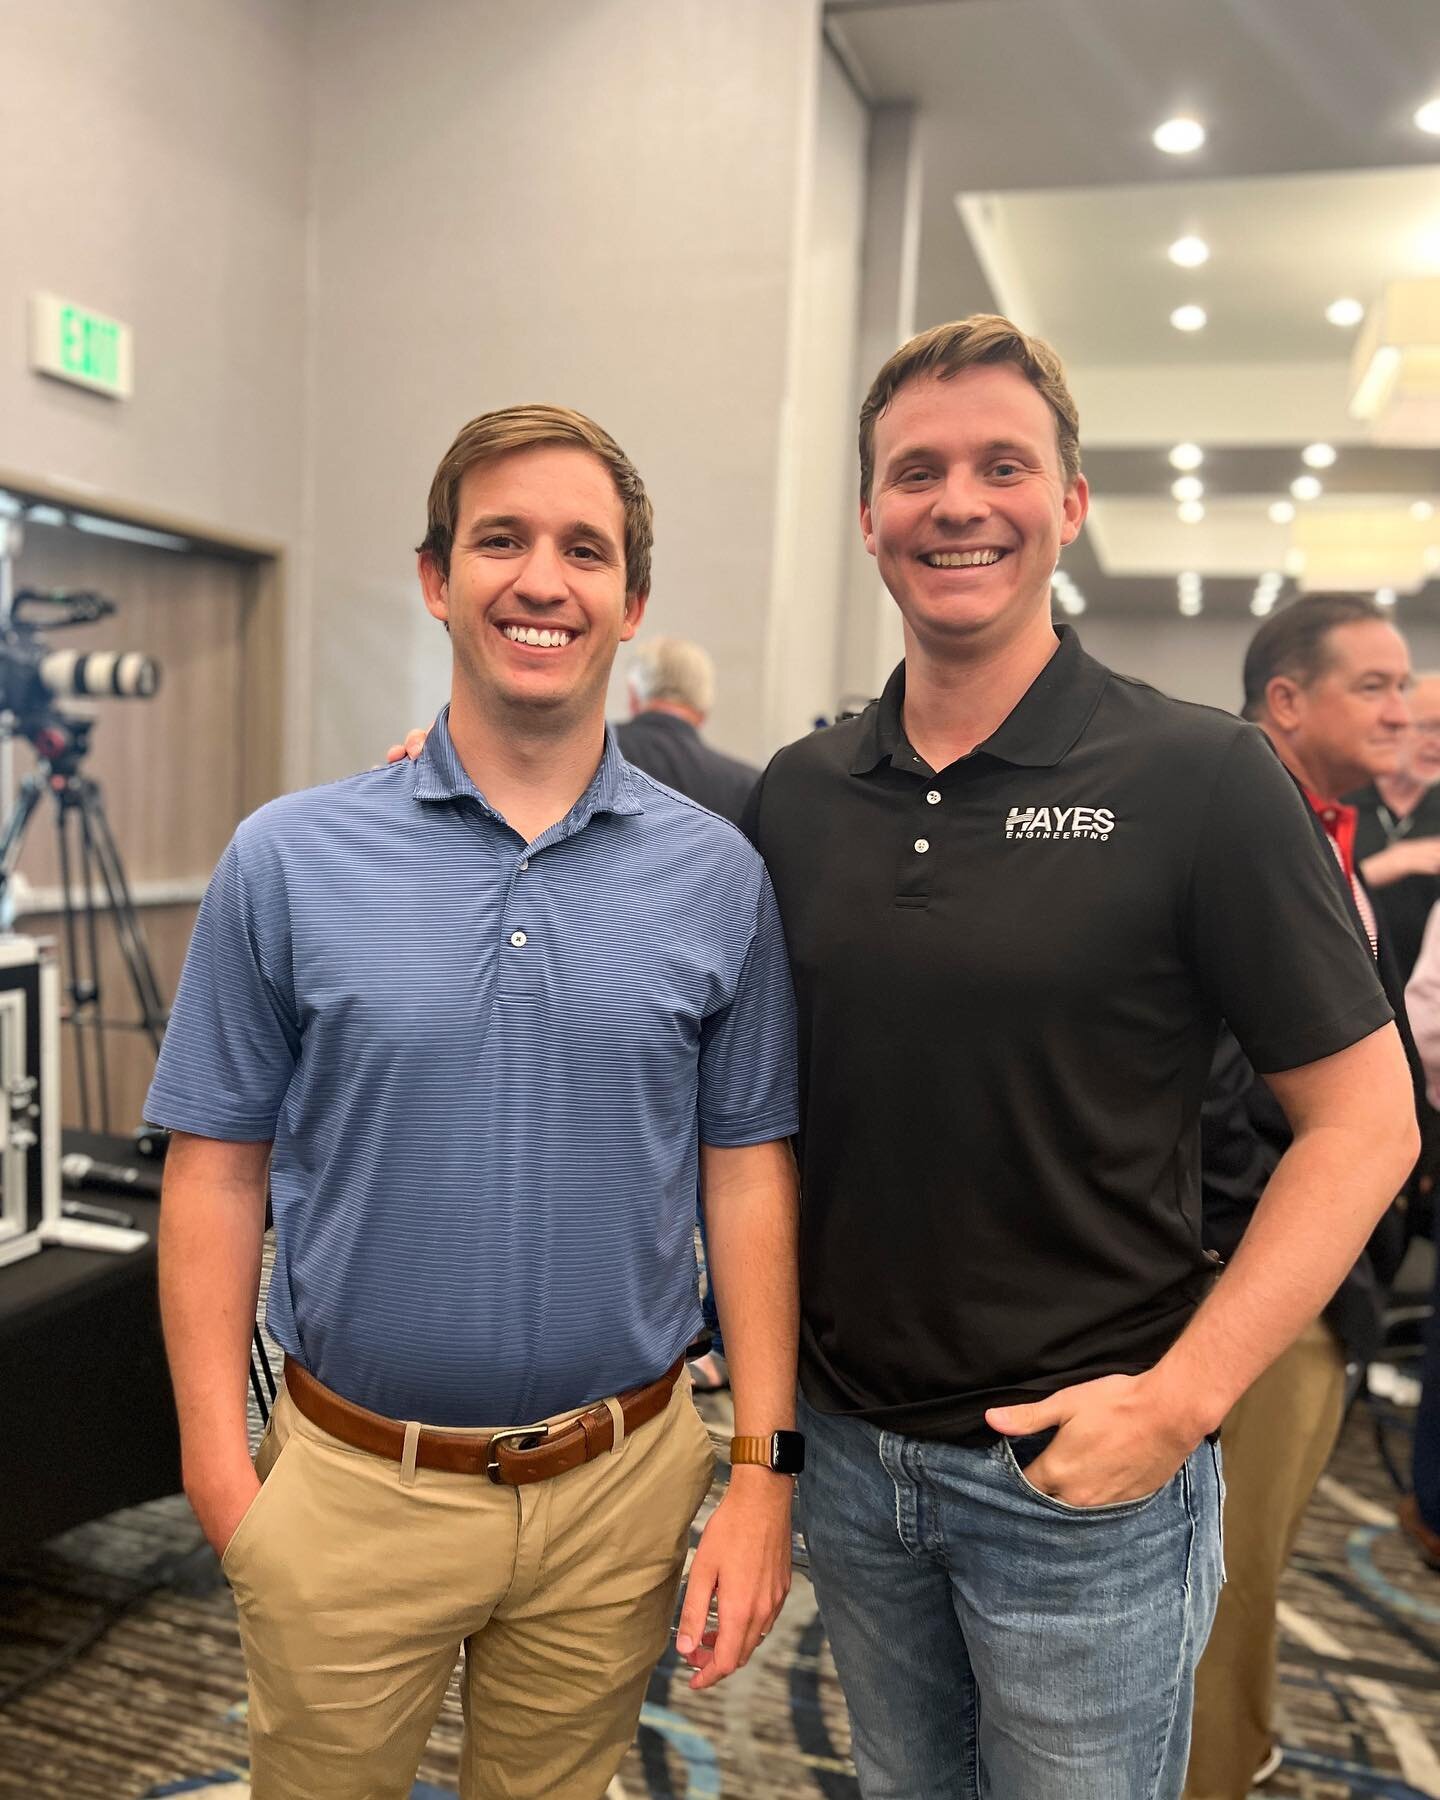 Our team, Stanley Hayes, P.E., Austin Lightle, P.E., and Landon White, E.I.T, enjoyed attending the @longviewchamber State of the County event today along with many other East Texas community leaders at the @hilongview Infinity Event Center. 

It was